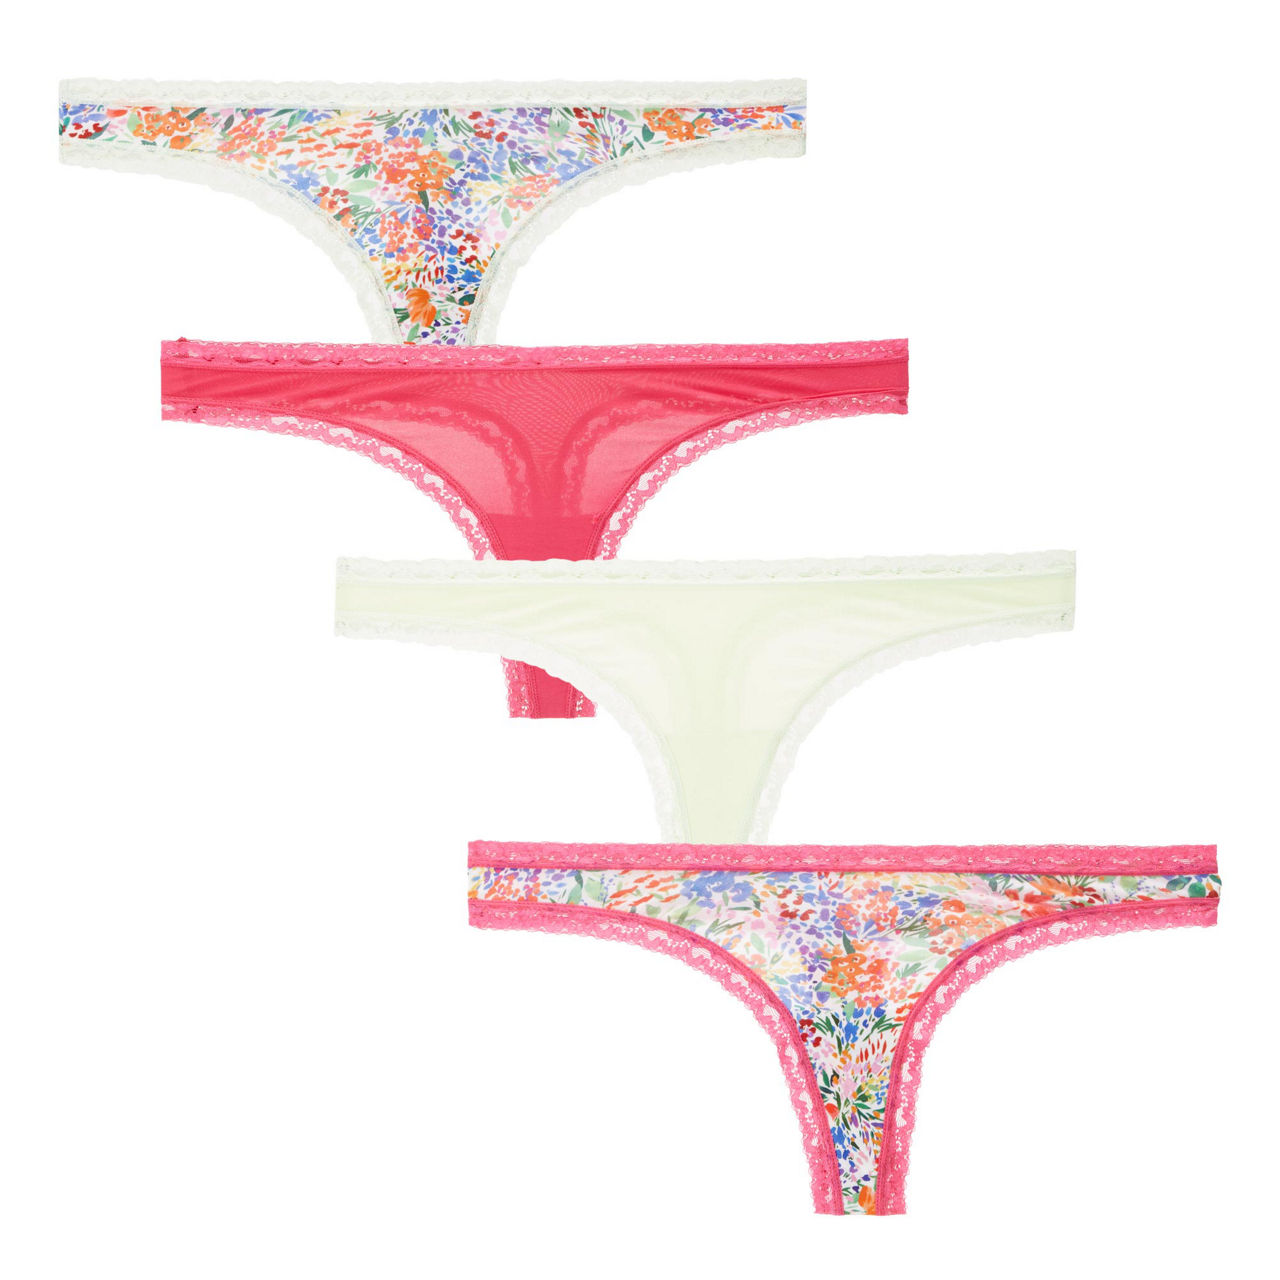 STRIPE & STARE Four-Pack Wildflower Thong Set